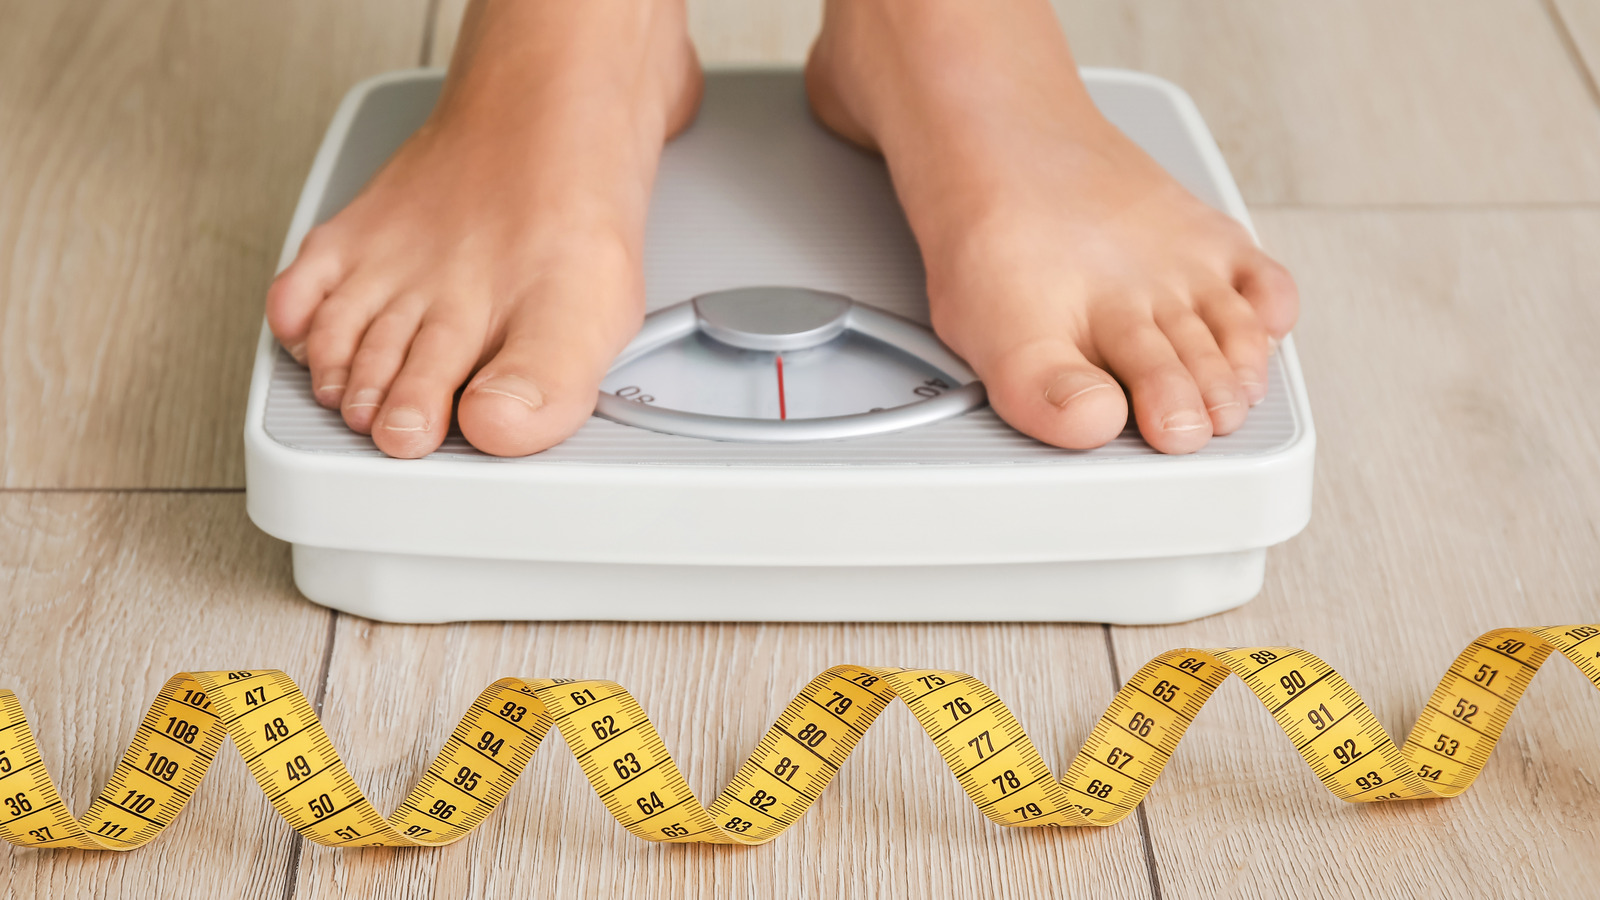 What Your Doctor Gets Wrong About Losing Weight